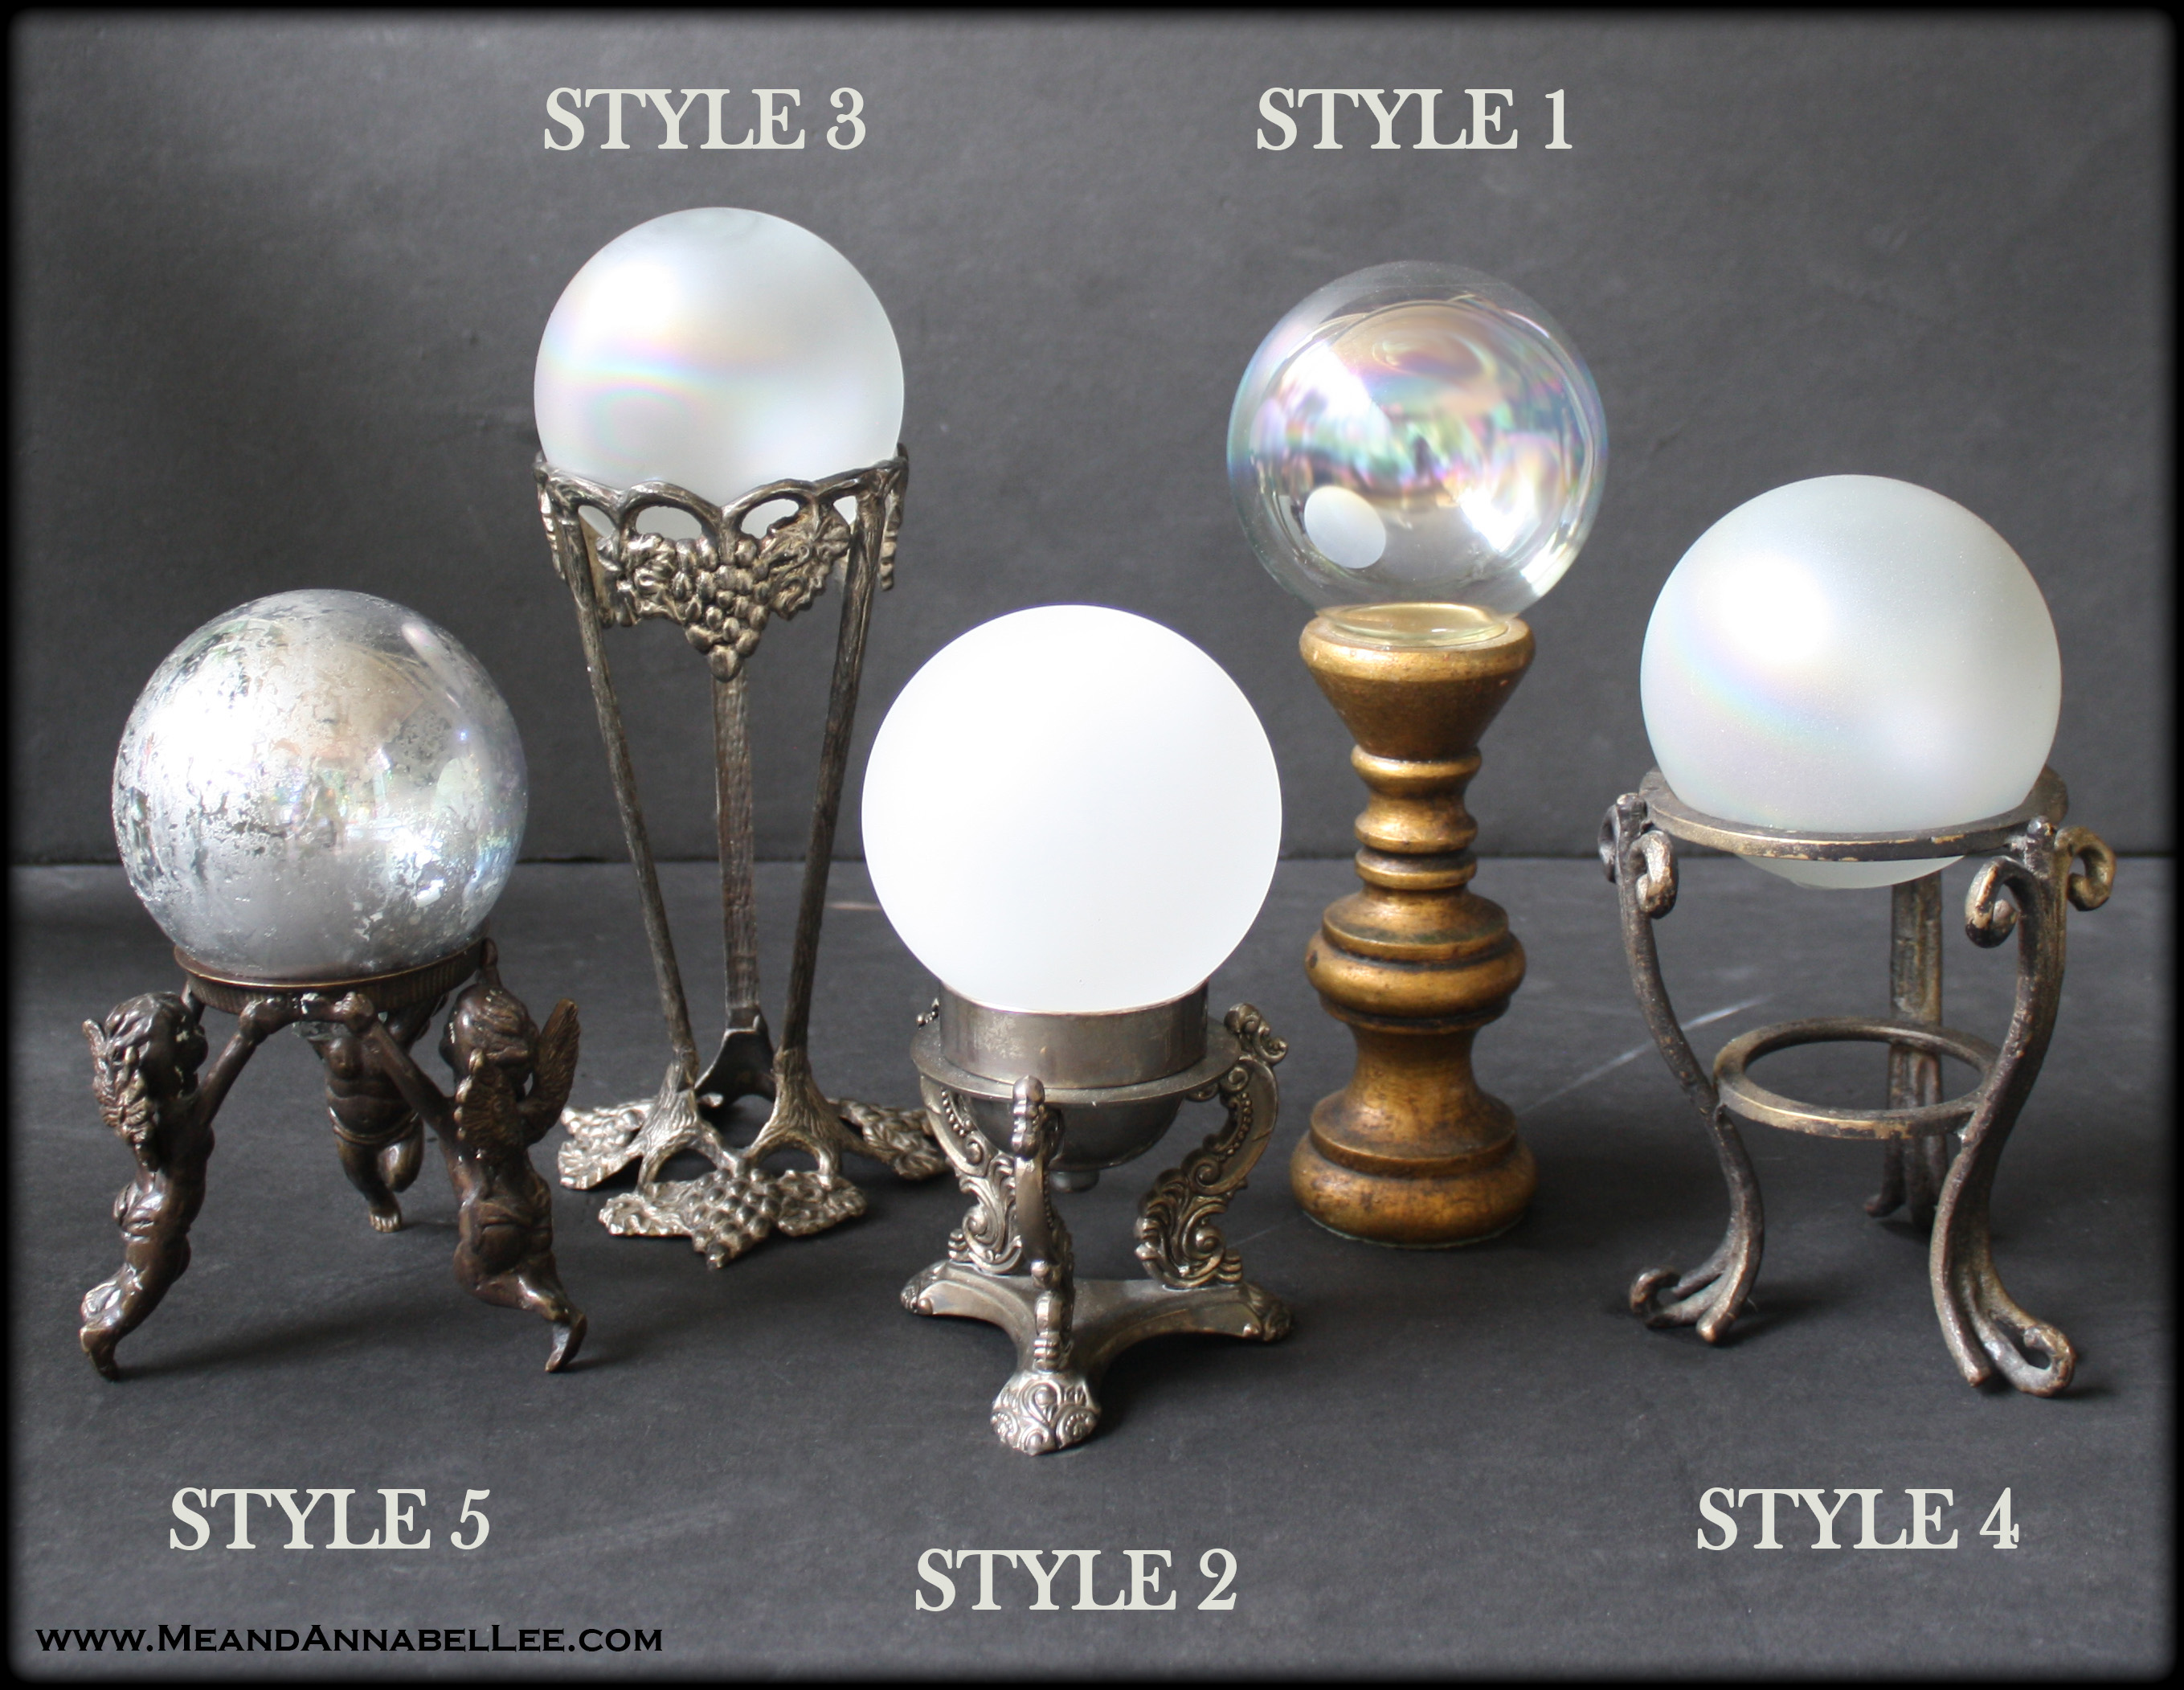 5 Easy Ideas for DIY Crystal Balls | Frosted Glass and Faux Mercury Glass Tutorials | Halloween Crafts and Decorations | Pagan Fortune Telling | Gazing Balls |www.MeandAnnabelLee.com